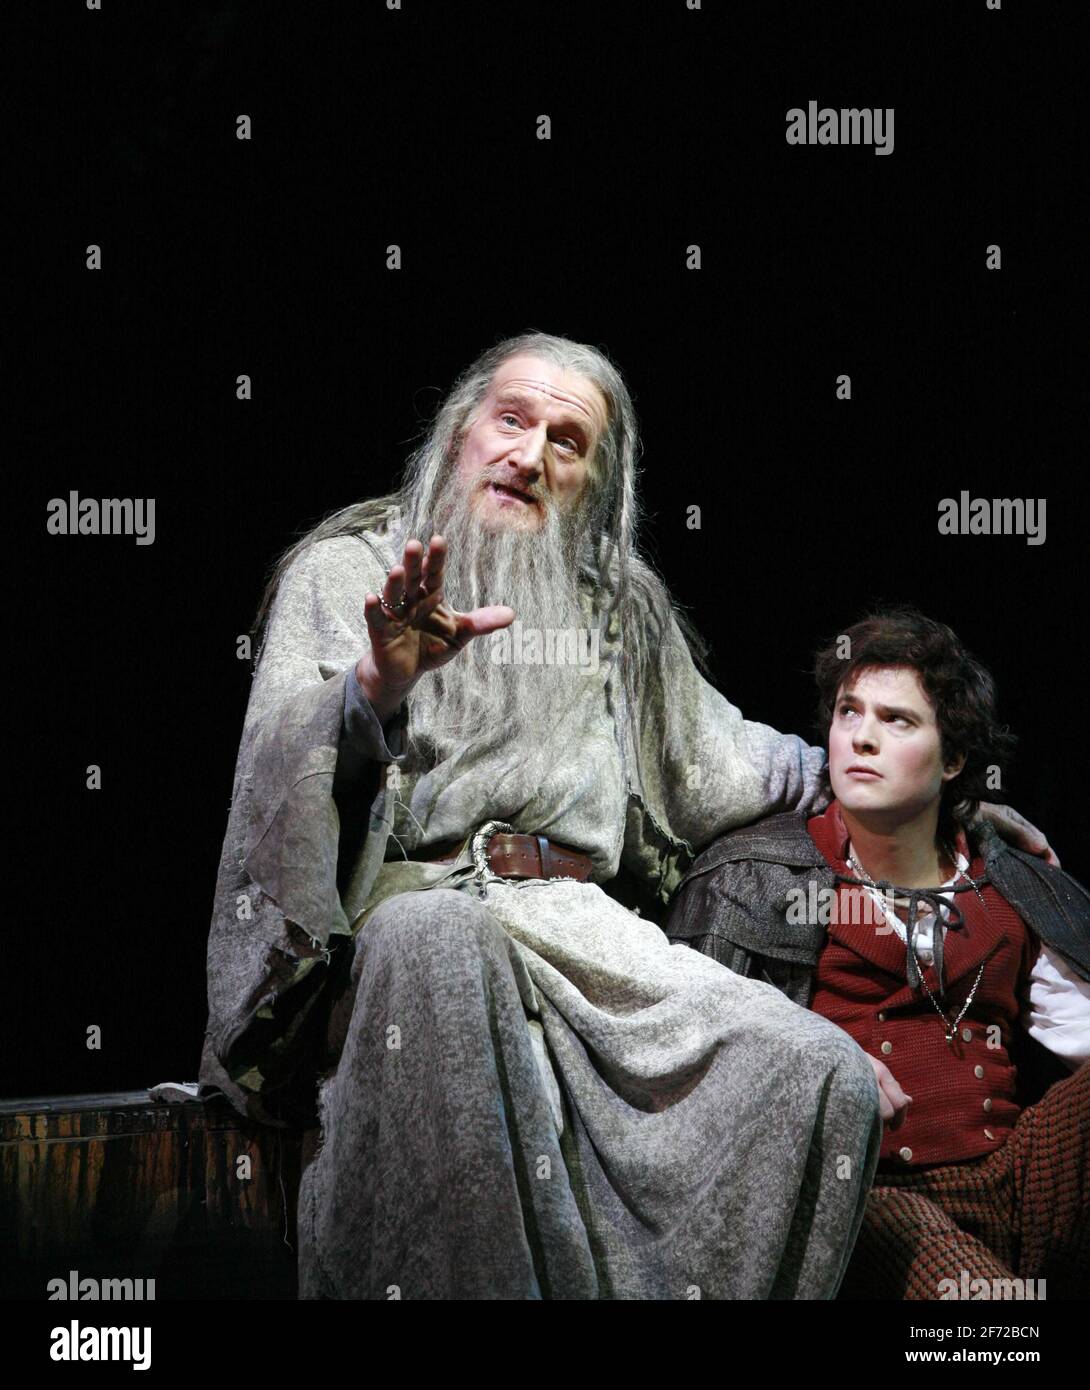 Mines of Moria - l-r: Malcolm Storry (Gandalf), James Loye (Frodo) in THE LORD OF THE RINGS at the Theatre Royal Drury Lane, London WC2  19/06/2007  based on the books by J R R Tolkien  book & lyrics: Shaun McKenna & Matthew Warchus  music: A R Rahman, Varttina & Christopher Nightingale  set & costume design: Rob Howell  lighting design: Paul Pyant  choreography: Peter Darling  director: Matthew Warchus Stock Photo